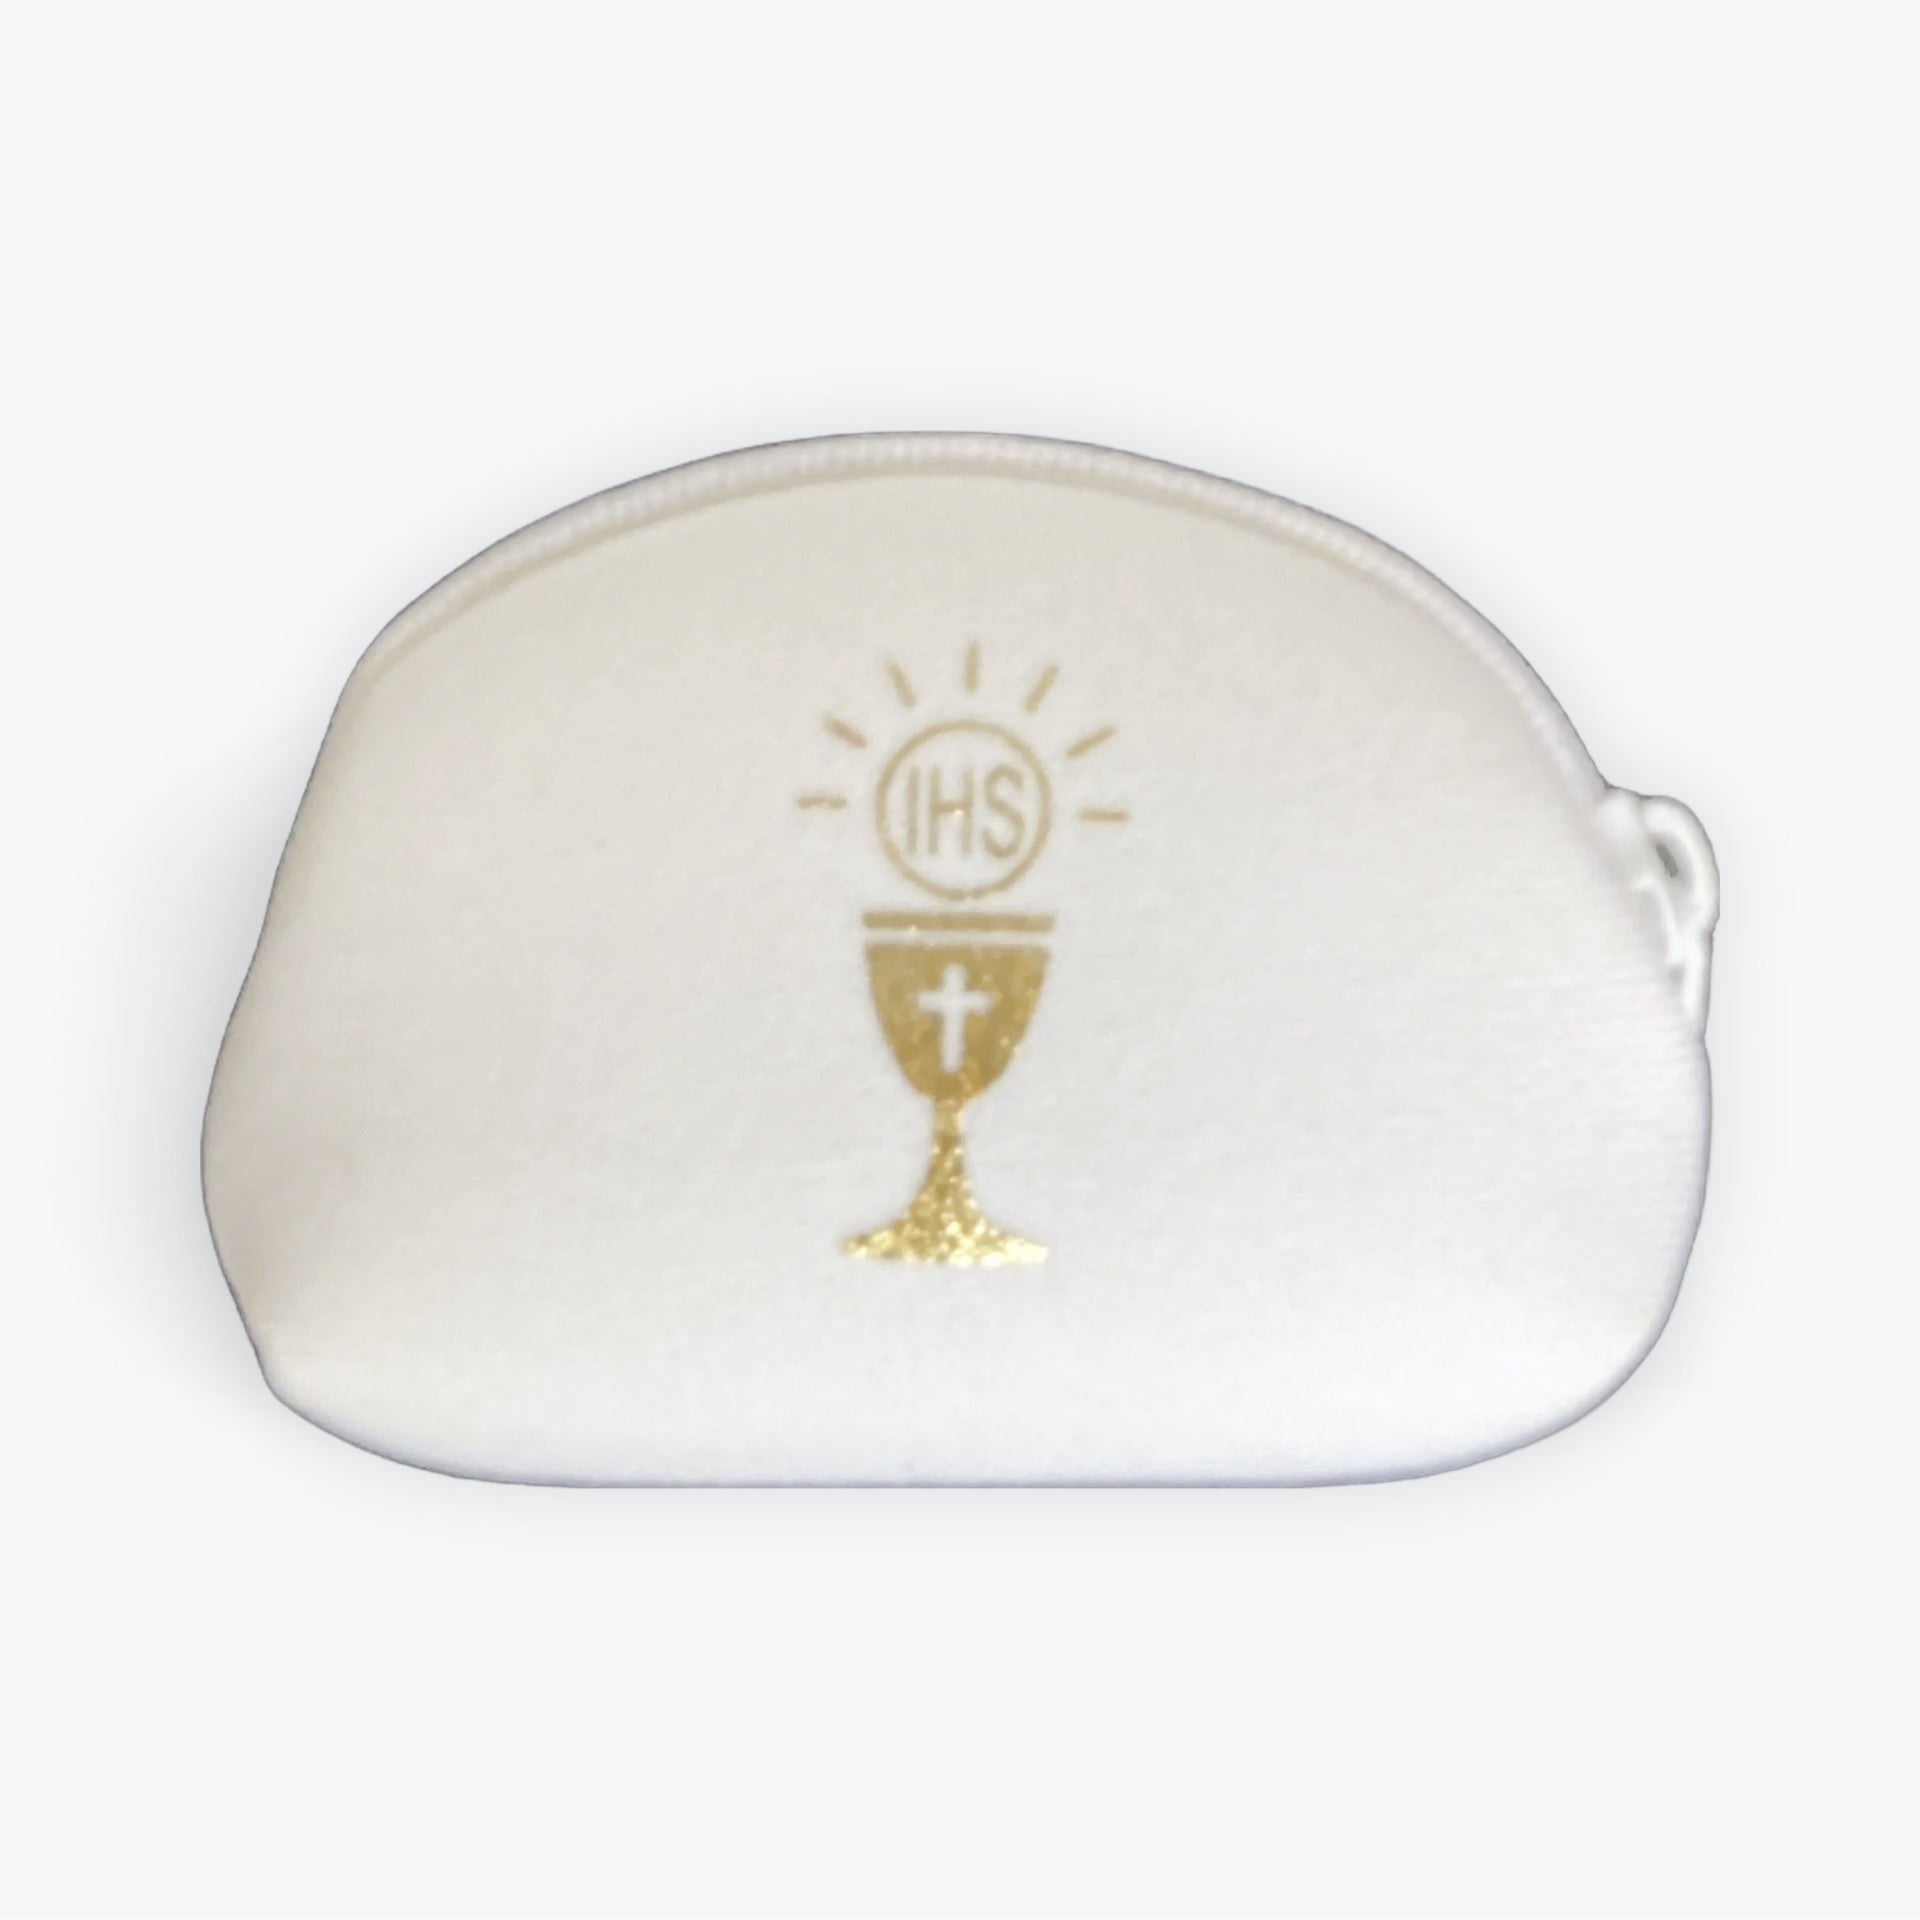 Communion Rosary Purse/White with Silk Embroidery | Free Delivery when you  spend £10 at Eden.co.uk